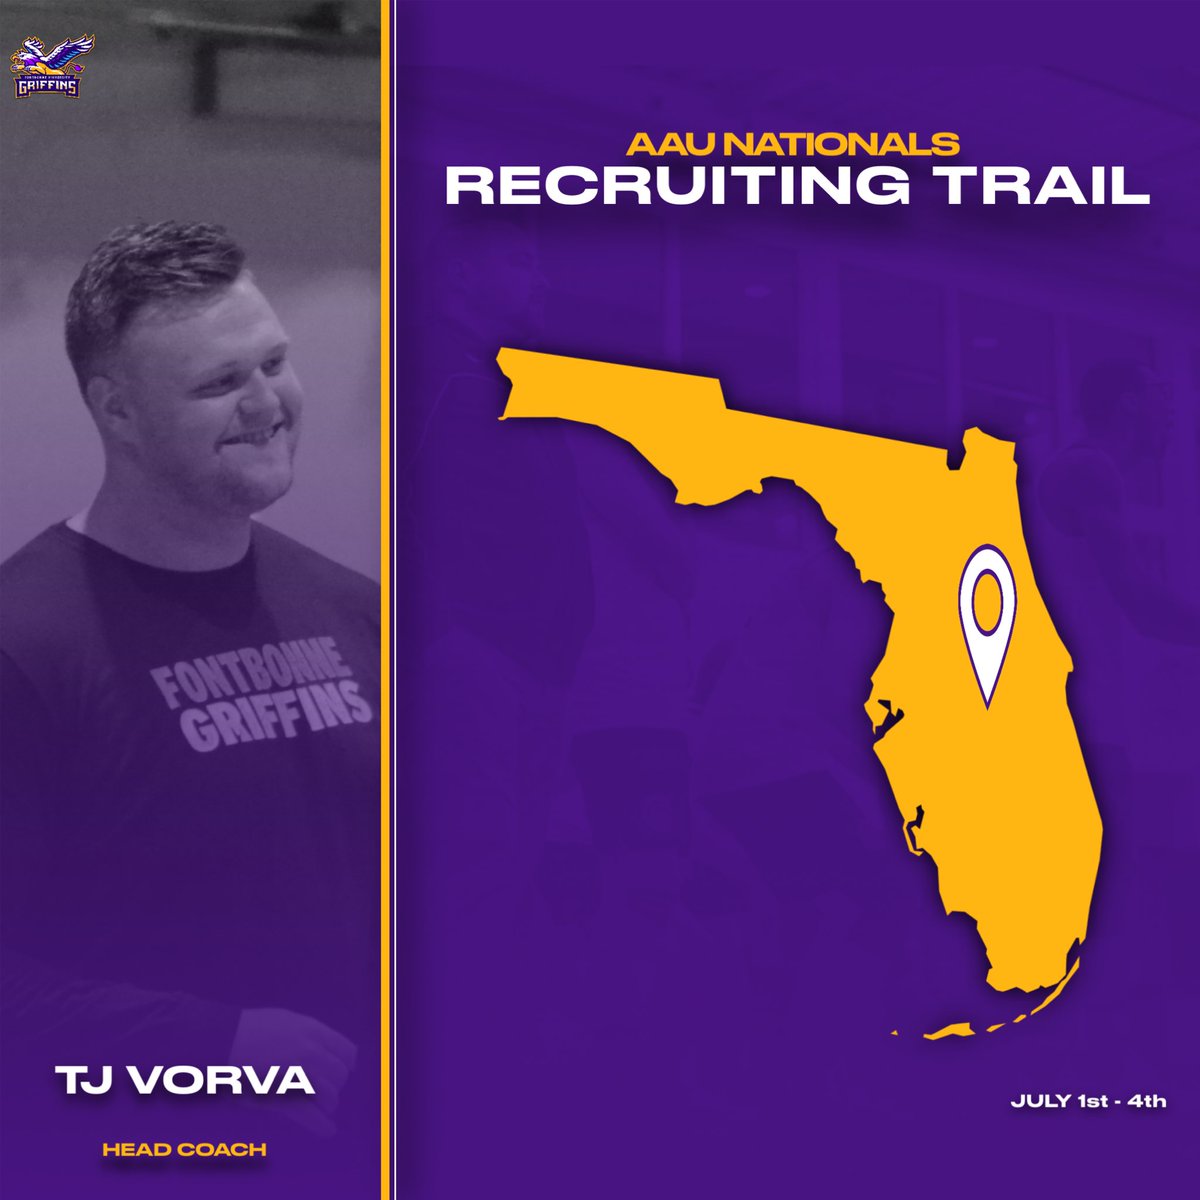 Head coach Tj Vorva will be on the lookout for future Griffins at this years AAU Nationals!

#fbumvb #fontbonne #volleyball #ncaa #ncaavolleyball #mensvolleyball #mcvl #stl #griffins